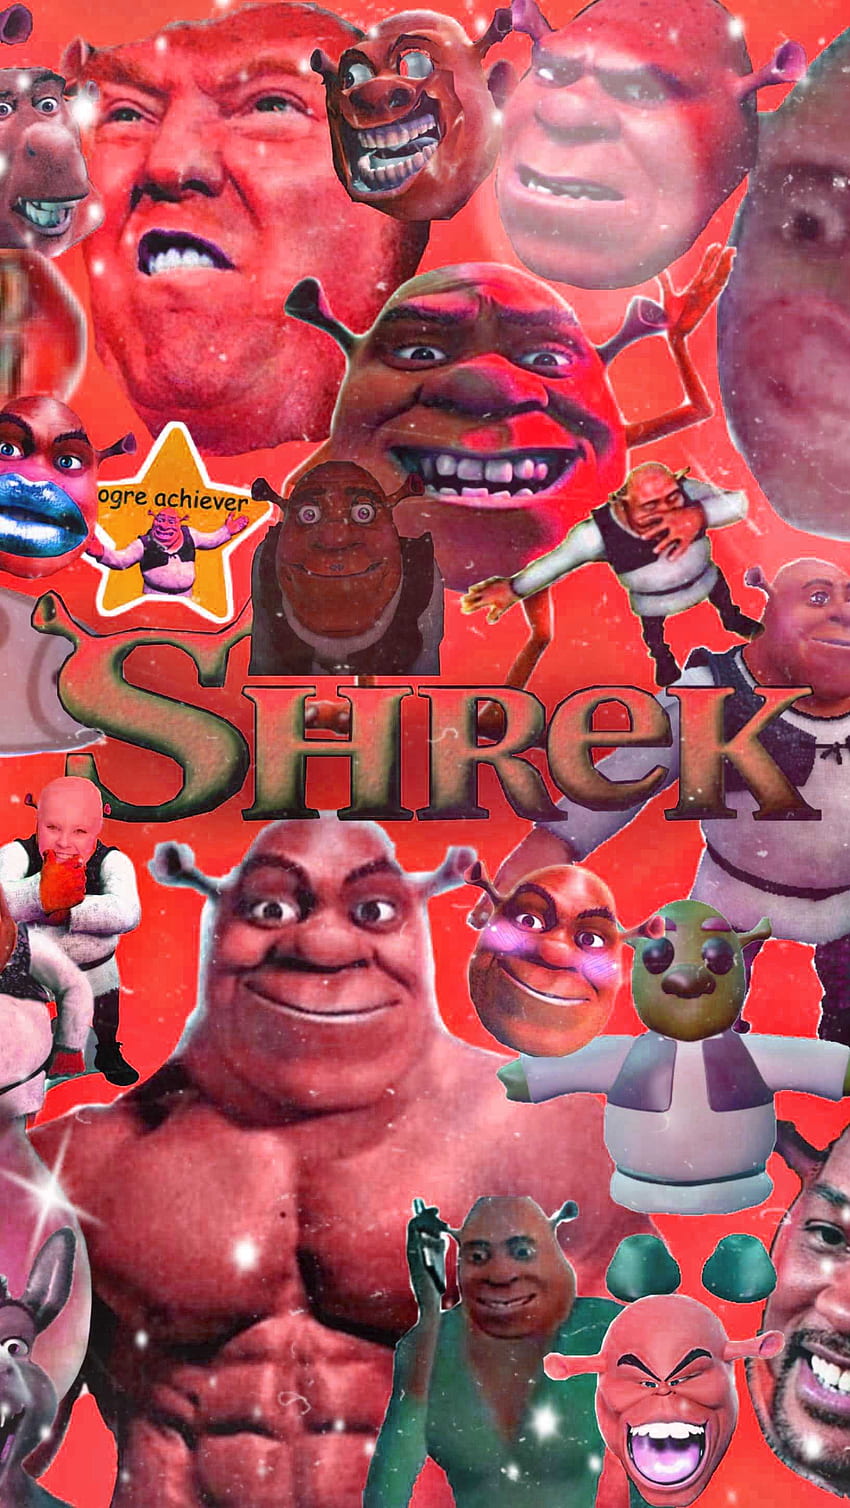 Shrek the third movie poster with many characters - Shrek